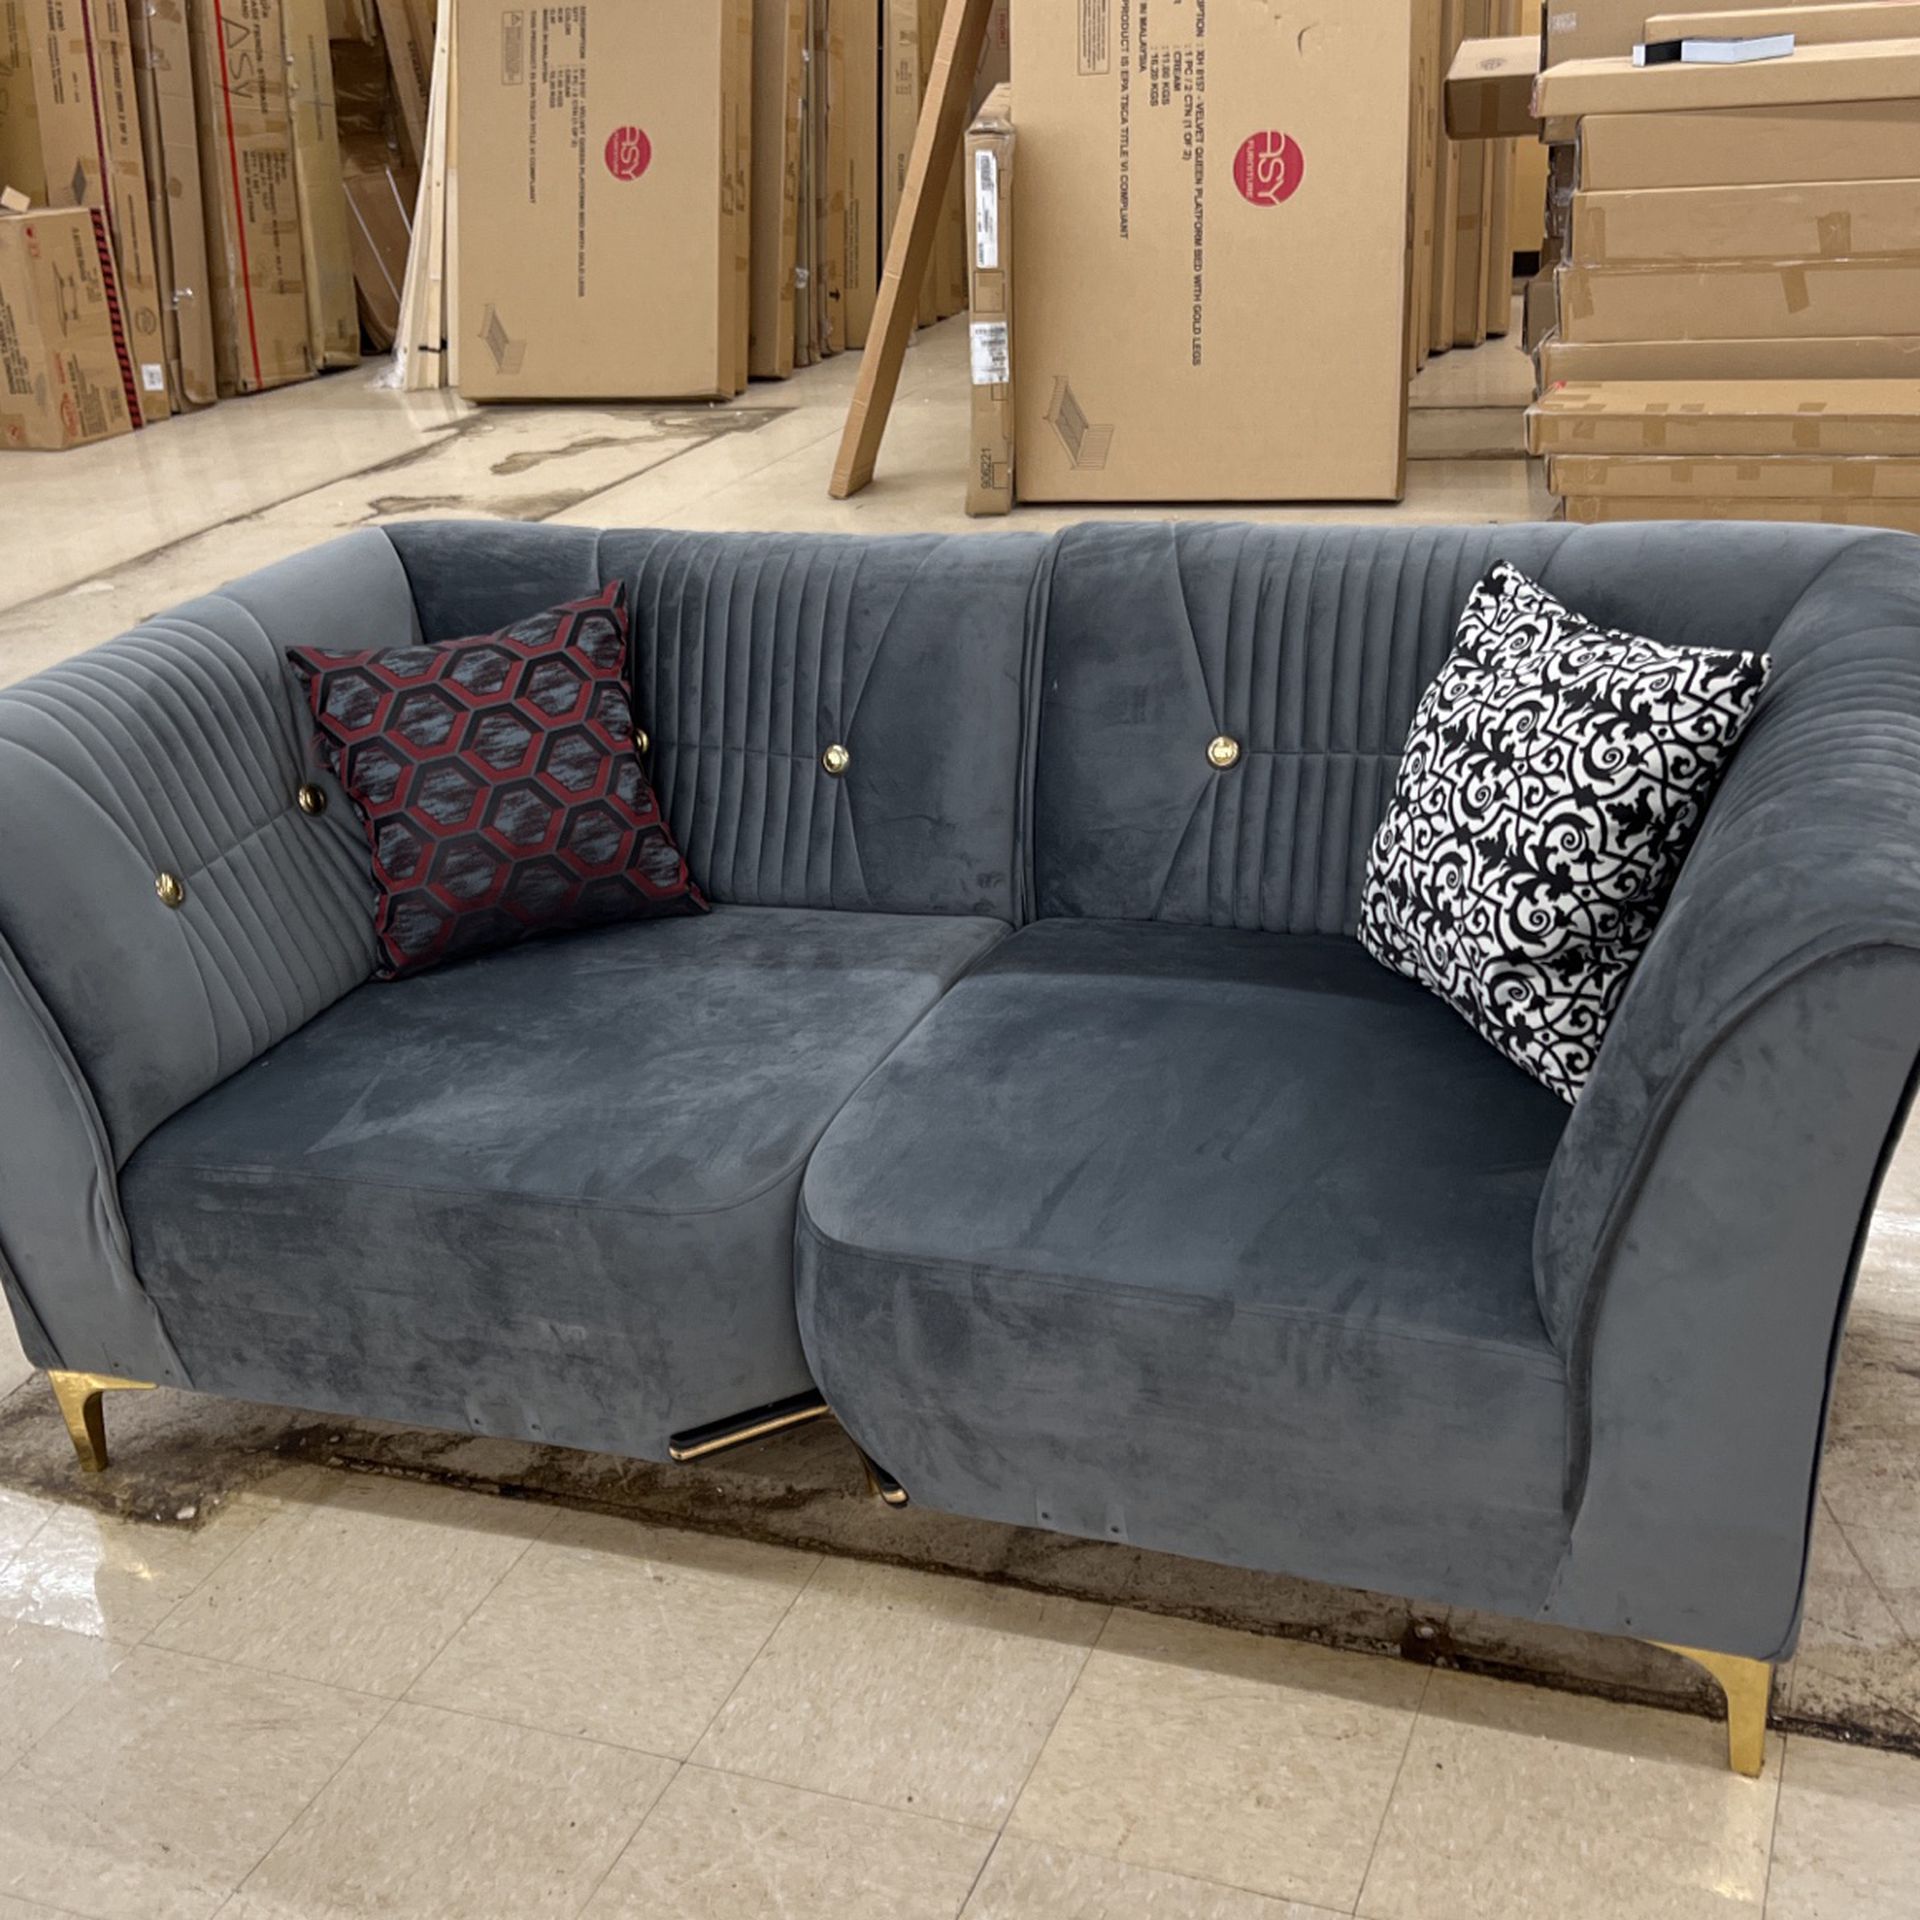 [SALE SALE SALE] Gray Velvet Loveseat With Gold Legs Pillows Included